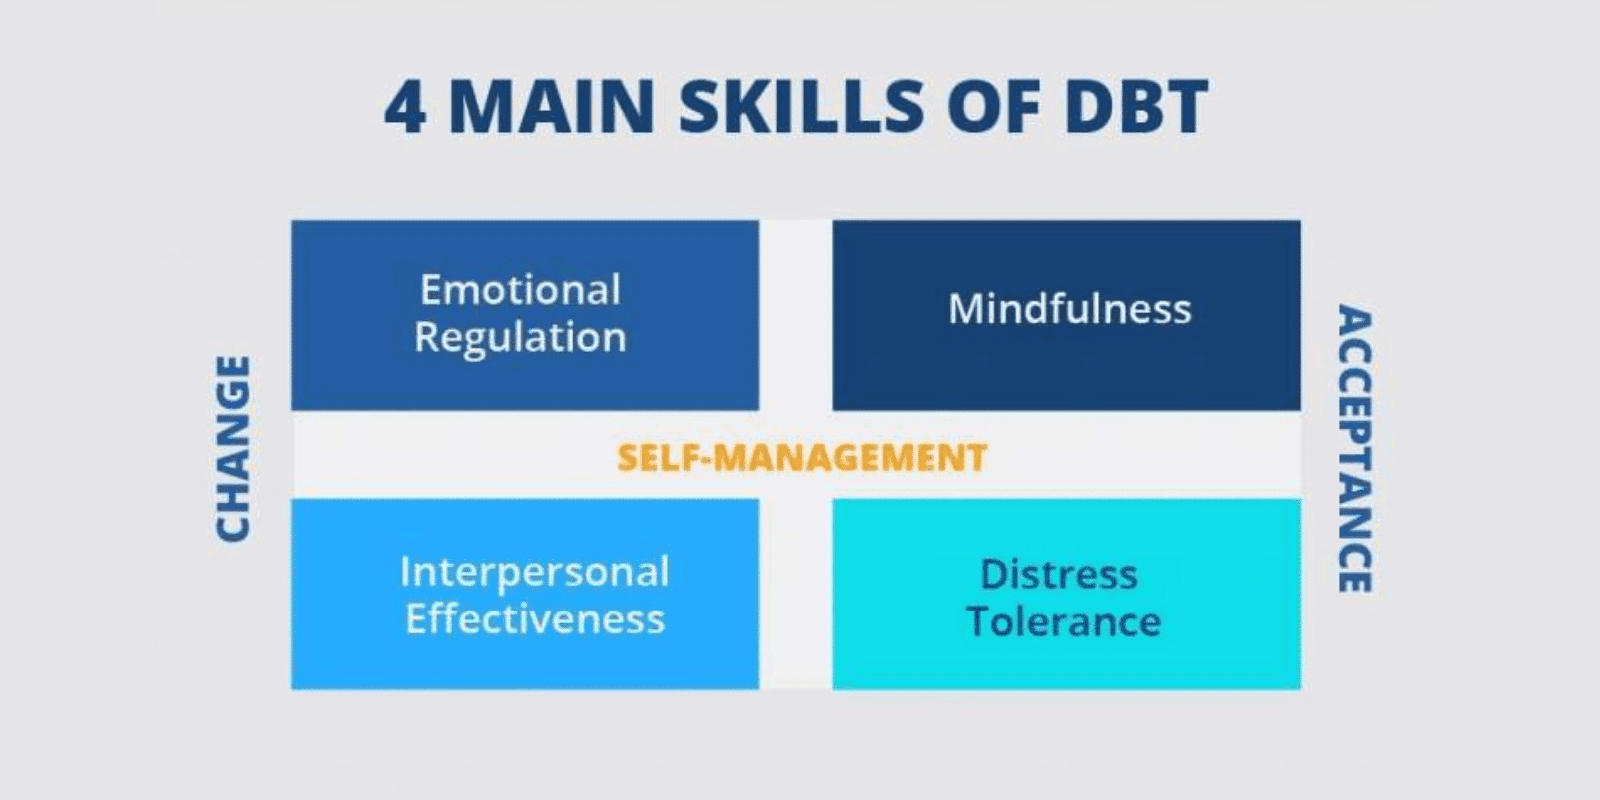 4 main skills of DBT laid out in a visually appealing way